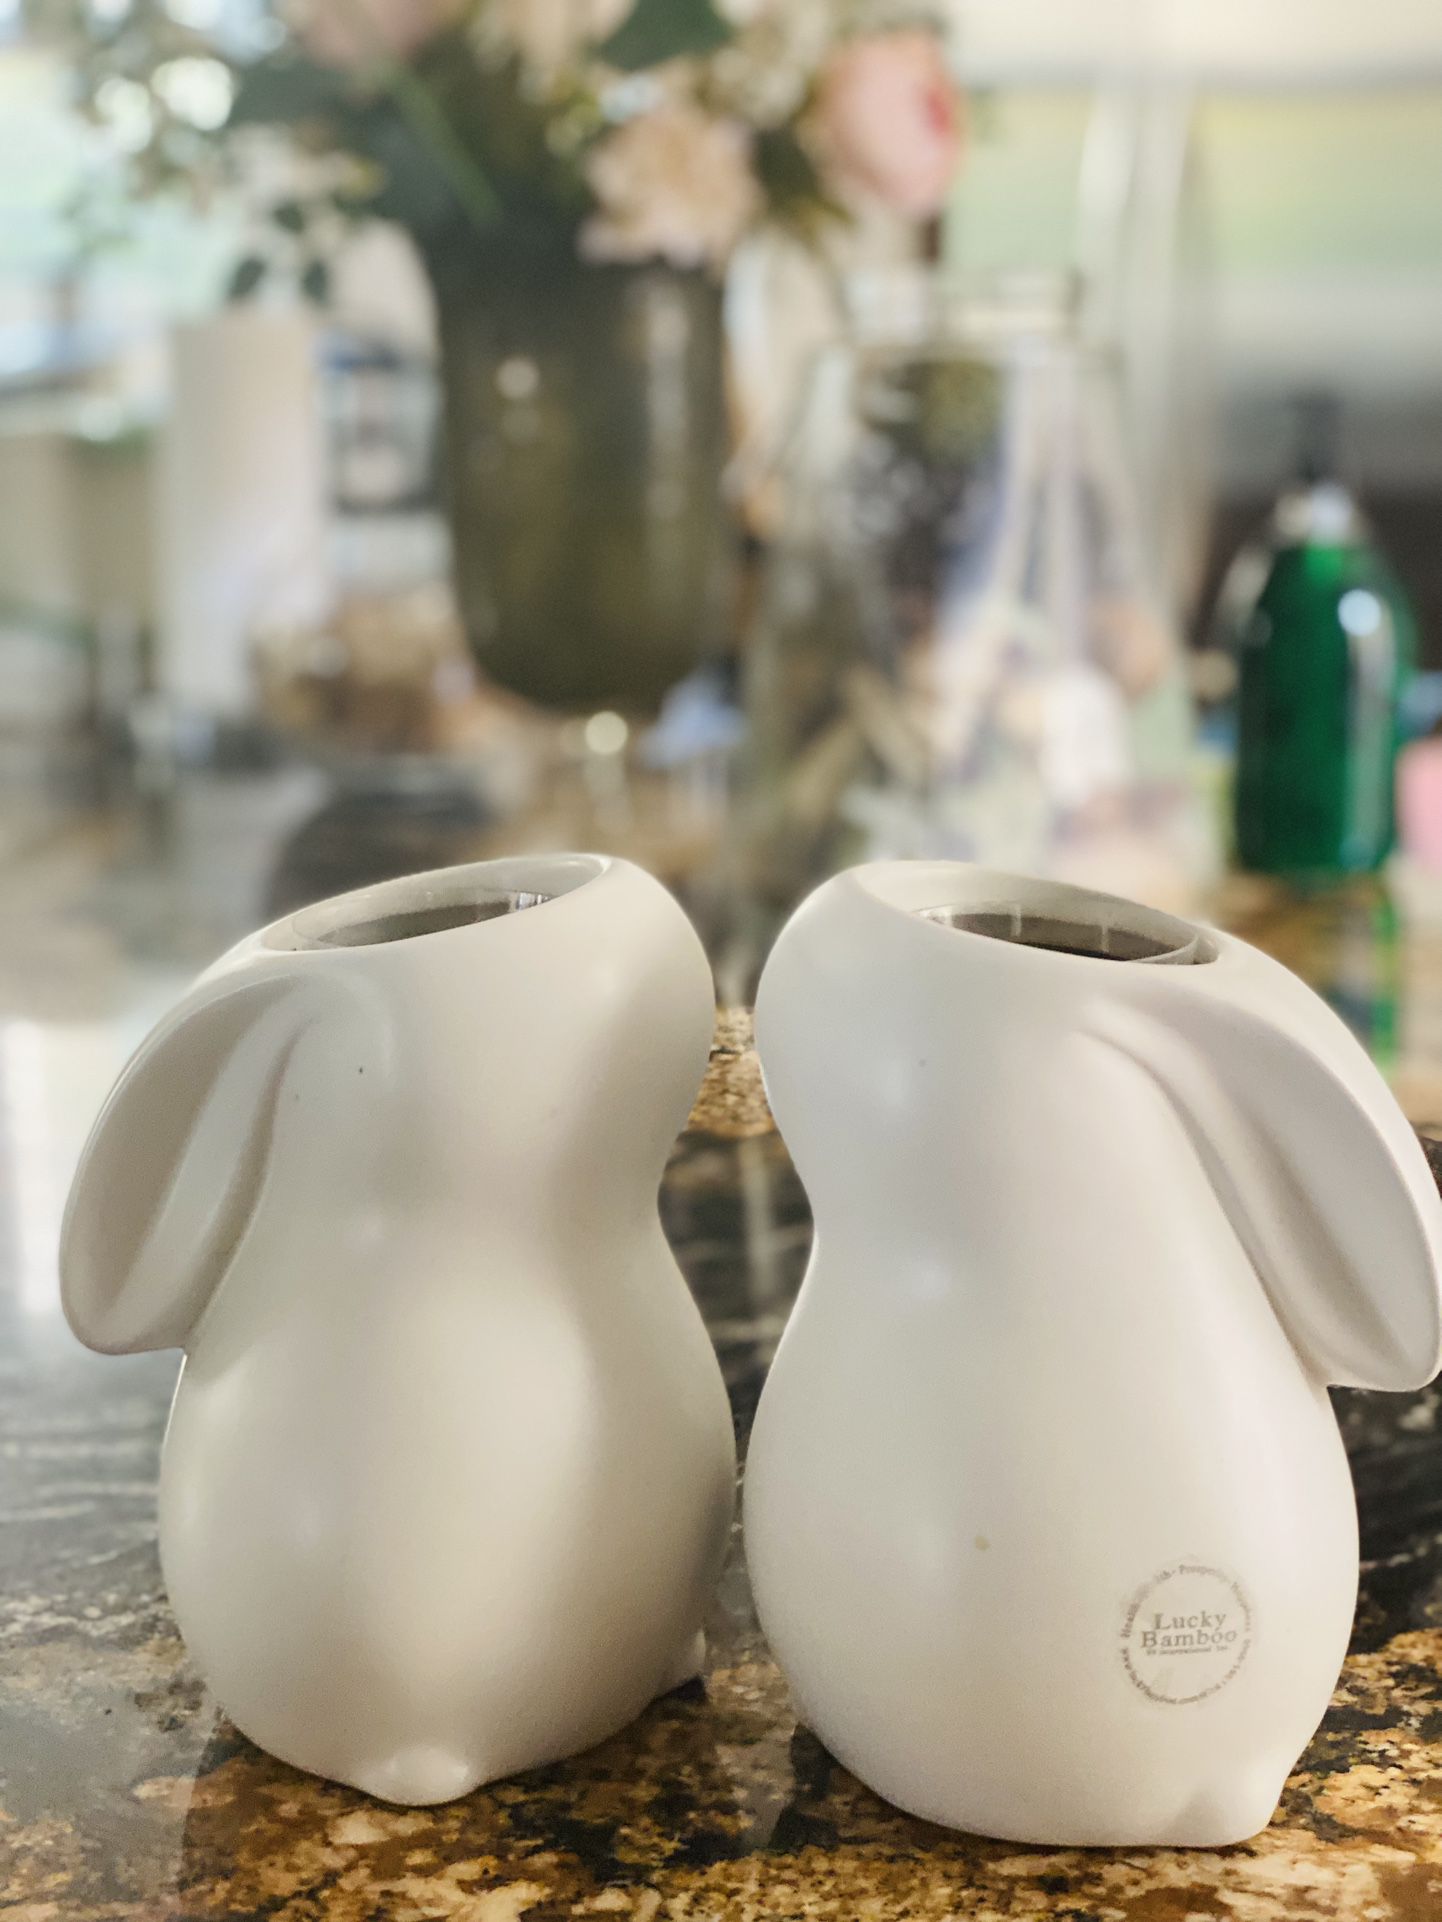 Two Bunny Rabbit Shape Ceramic Vases For Water Plants